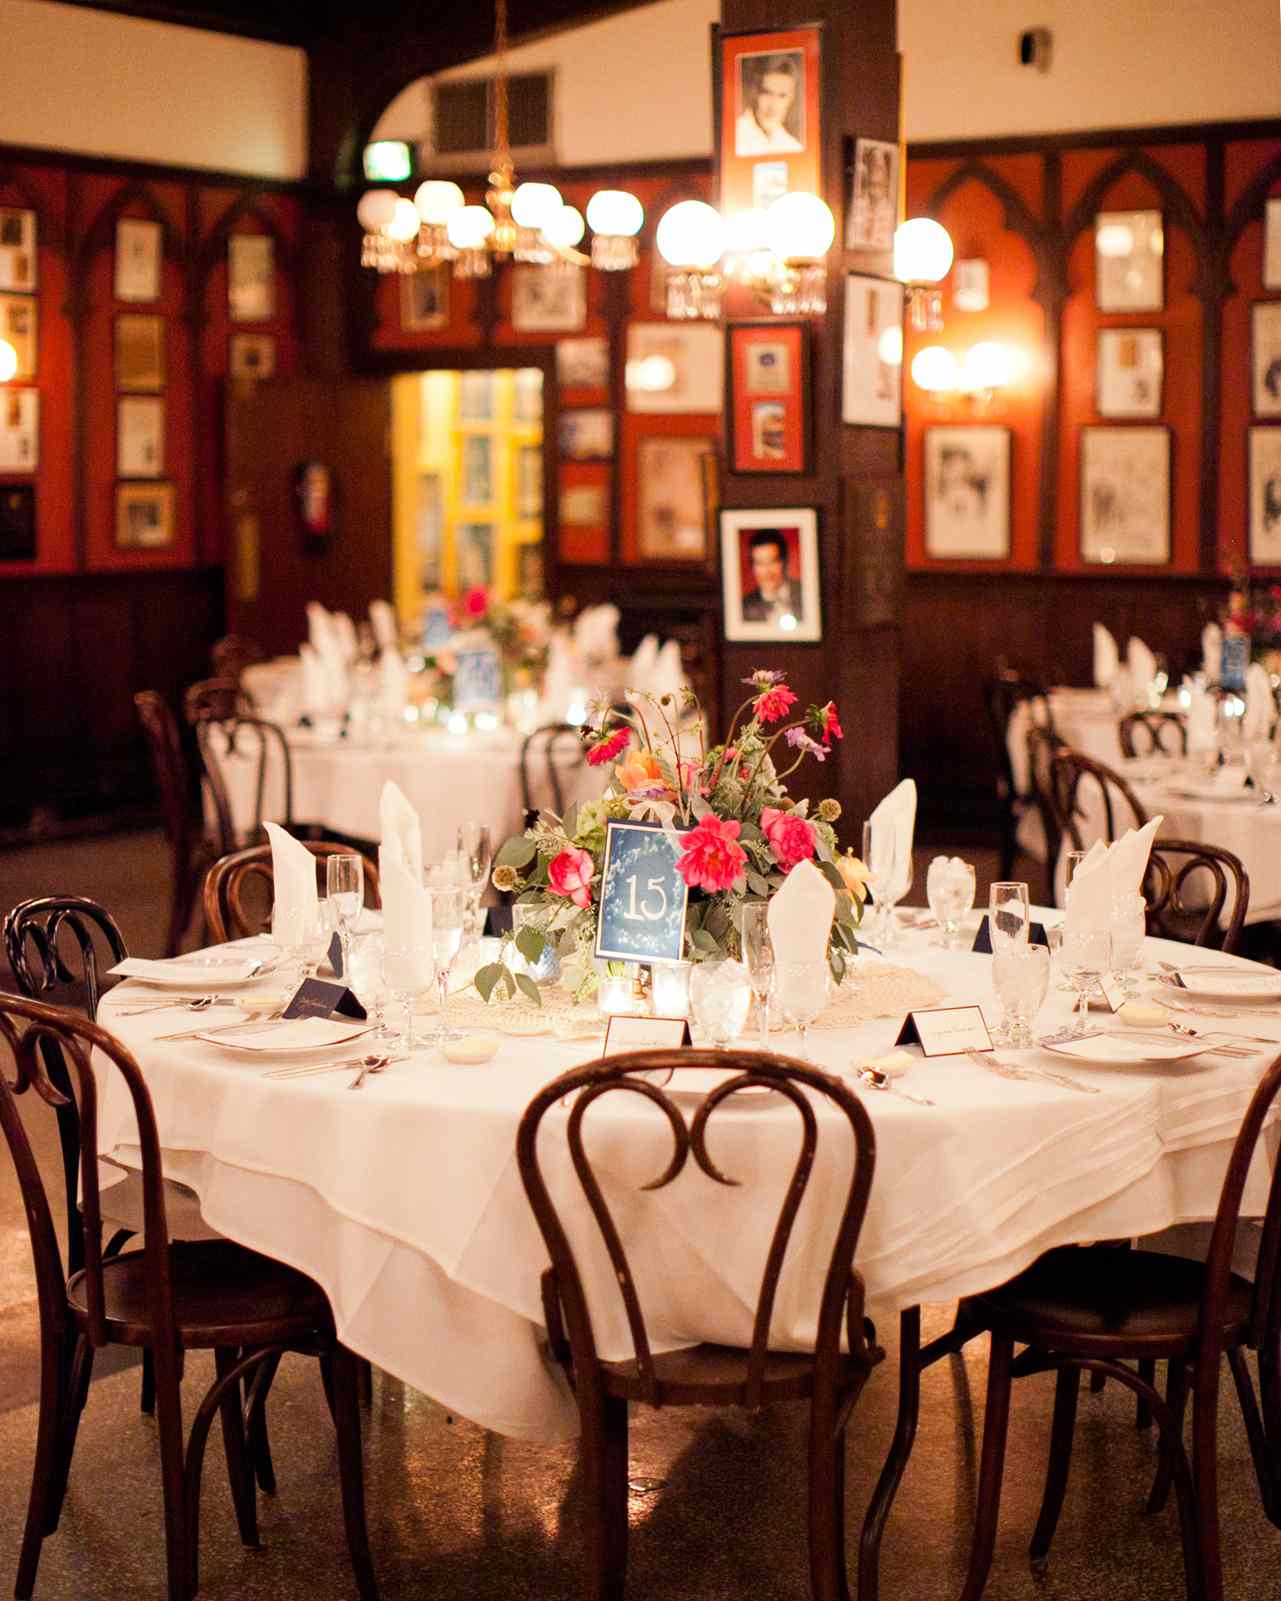 Pros and Cons of a Restaurant Wedding